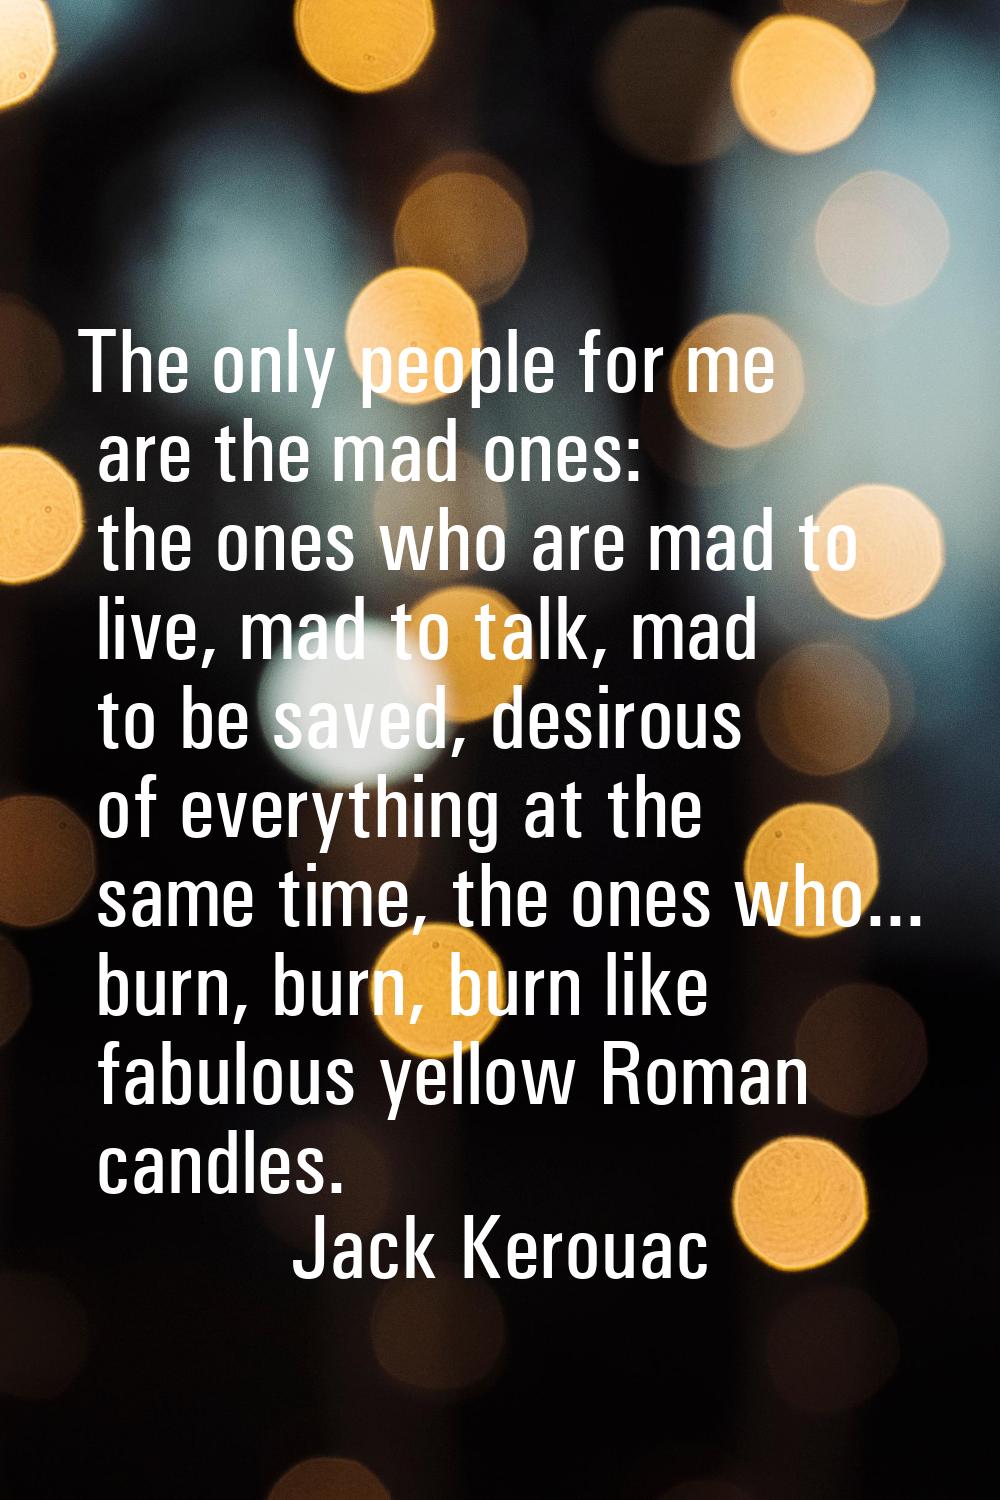 The only people for me are the mad ones: the ones who are mad to live, mad to talk, mad to be saved